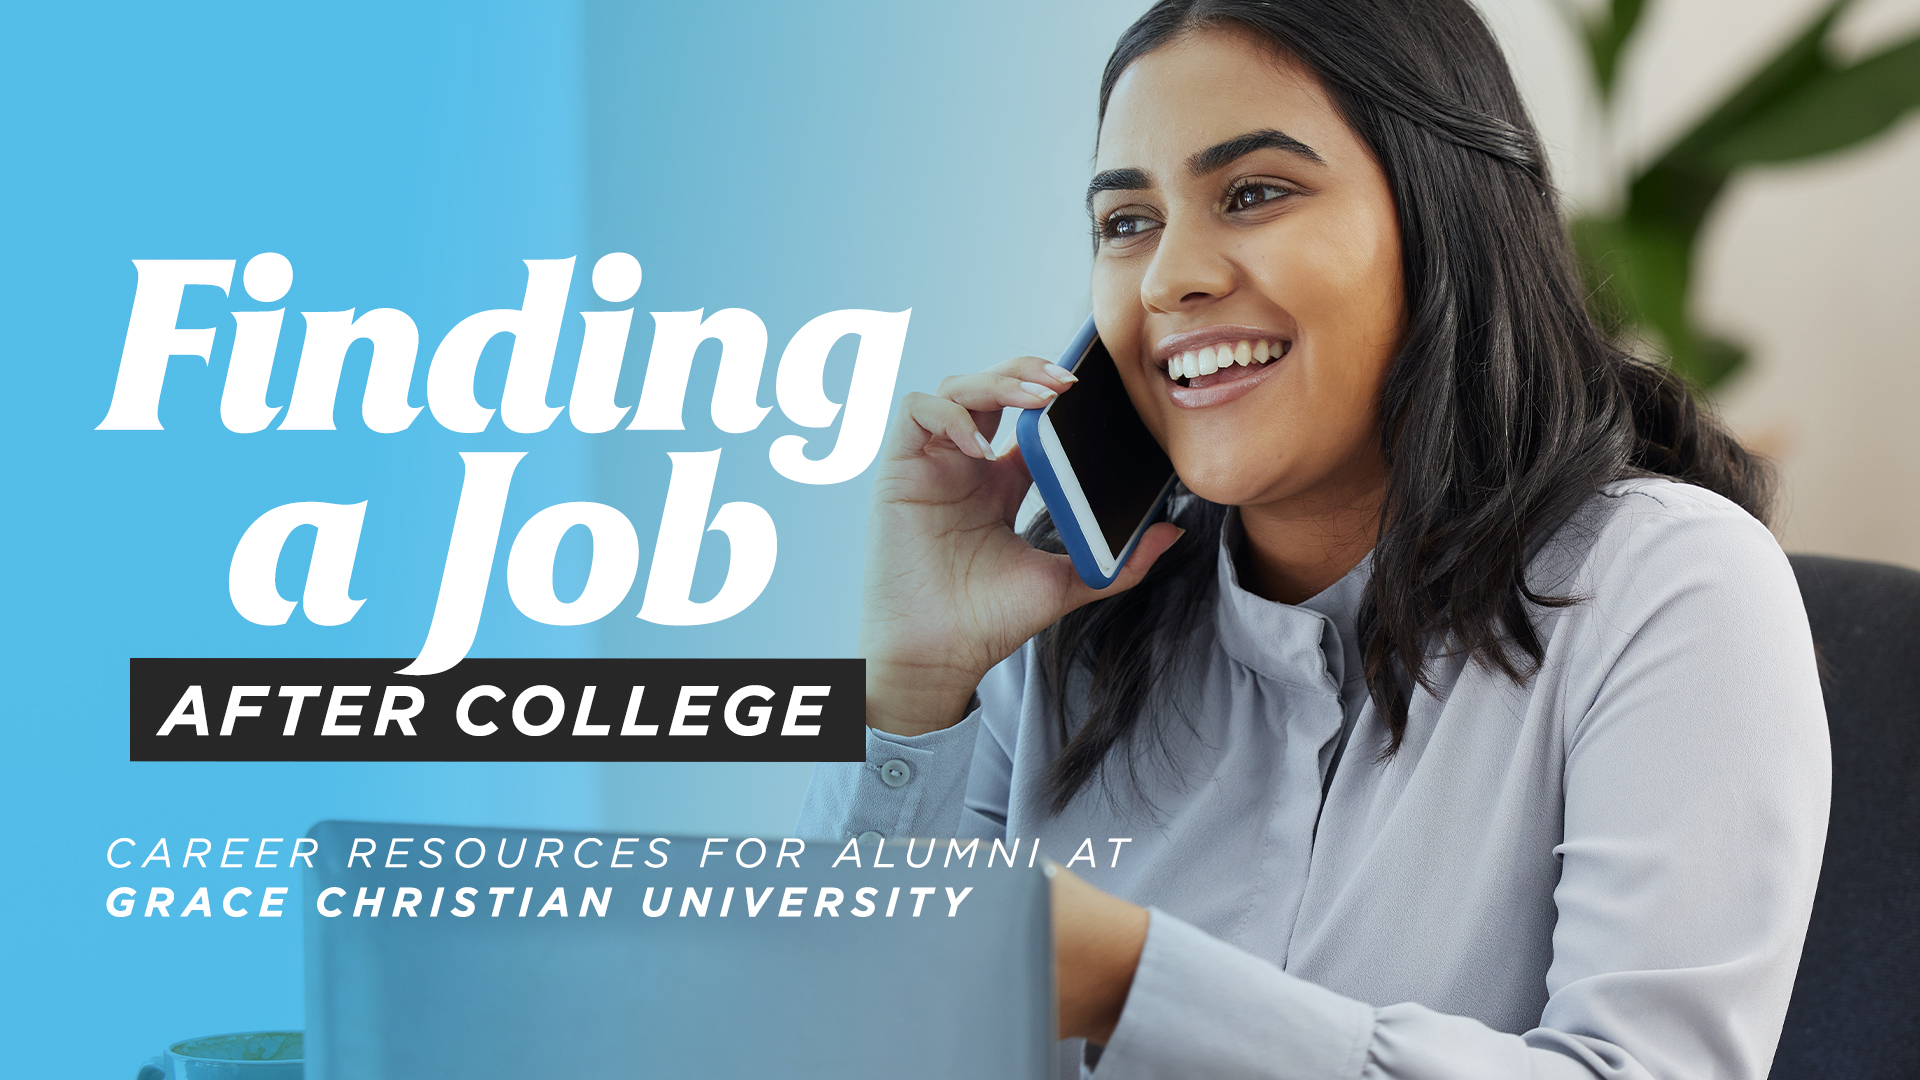 Finding a Job After College - Career Resources for Alumni at Grace Christian University